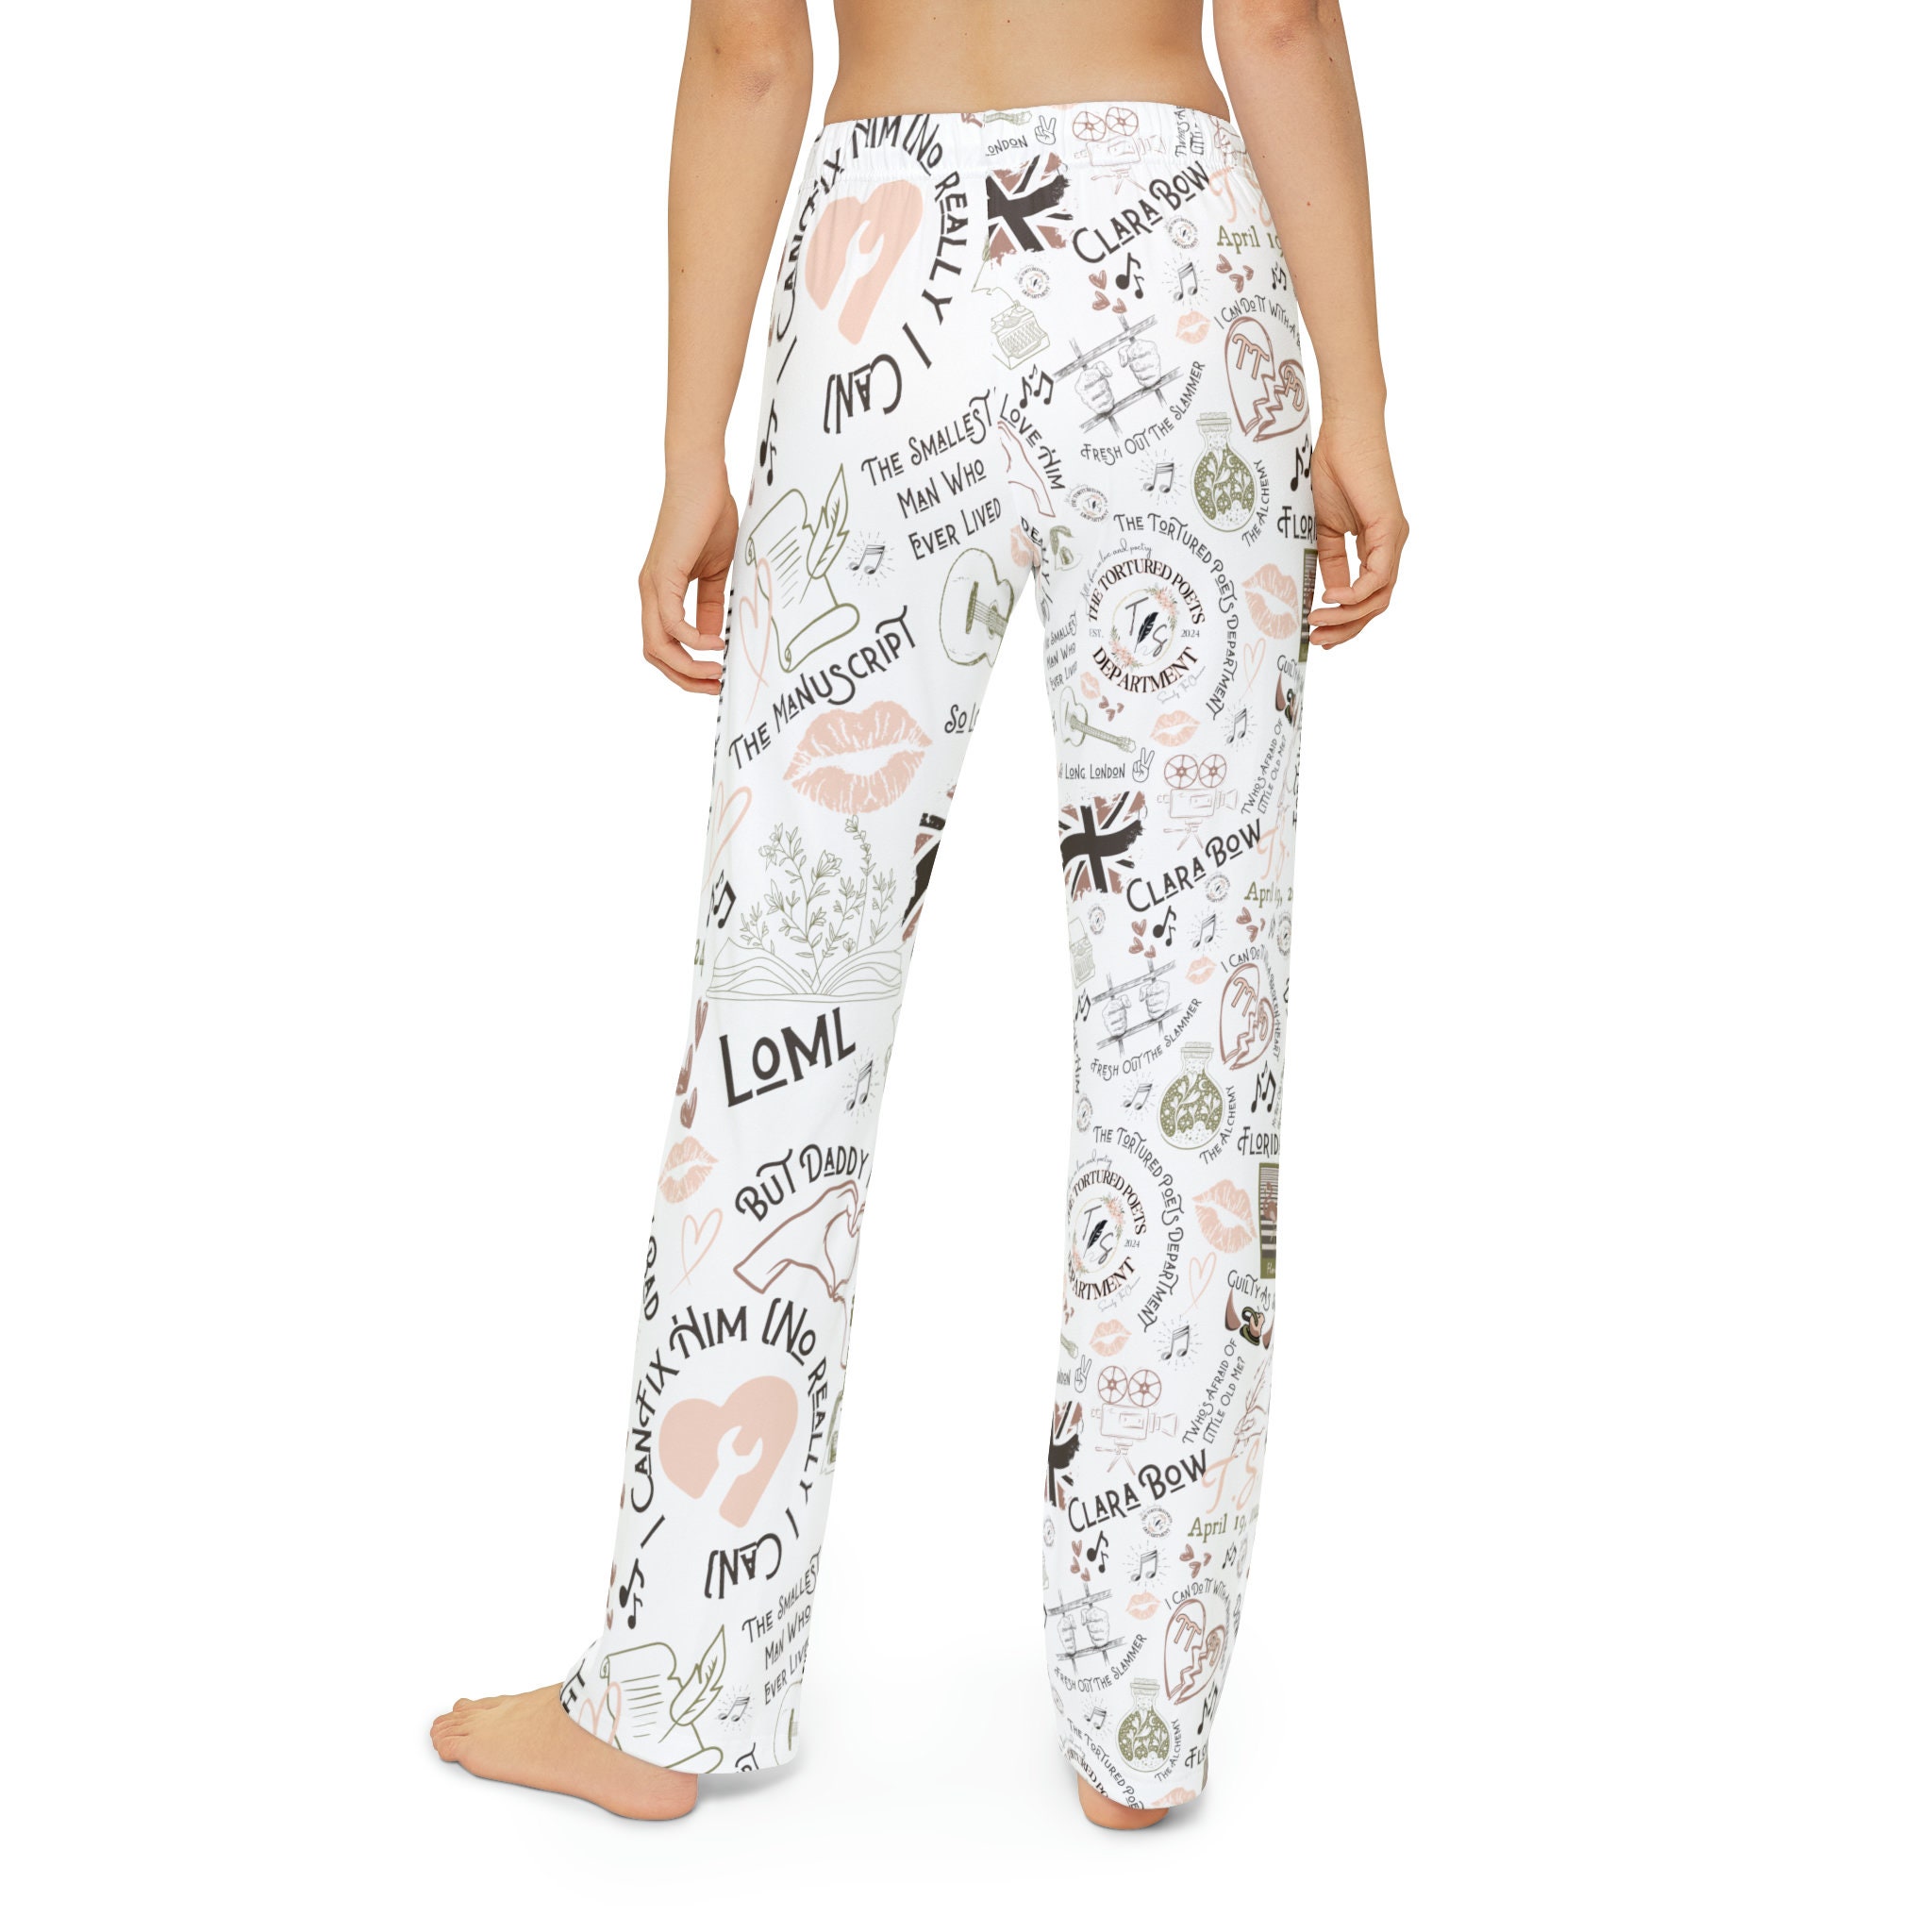 Tortured Poets Department TTPD Pajama Pants, Taylor Merch, Gift For Mother's day